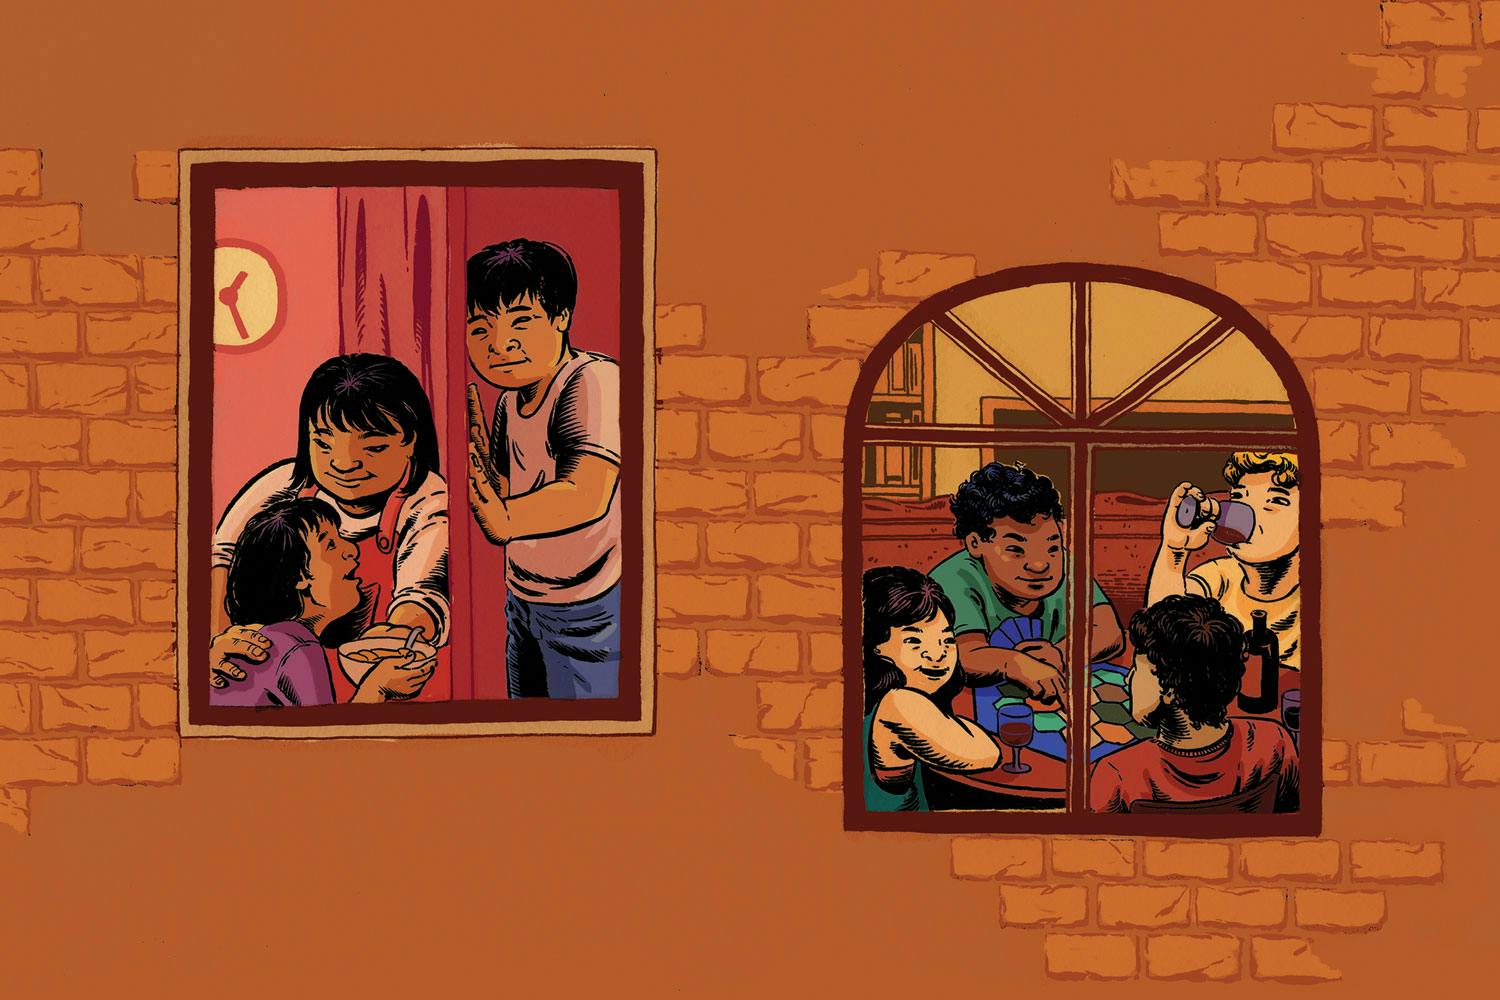 Illustration—2 windows in a brick wall show a family separated by a wall, and 4 roommates playing board games, drinking wine.